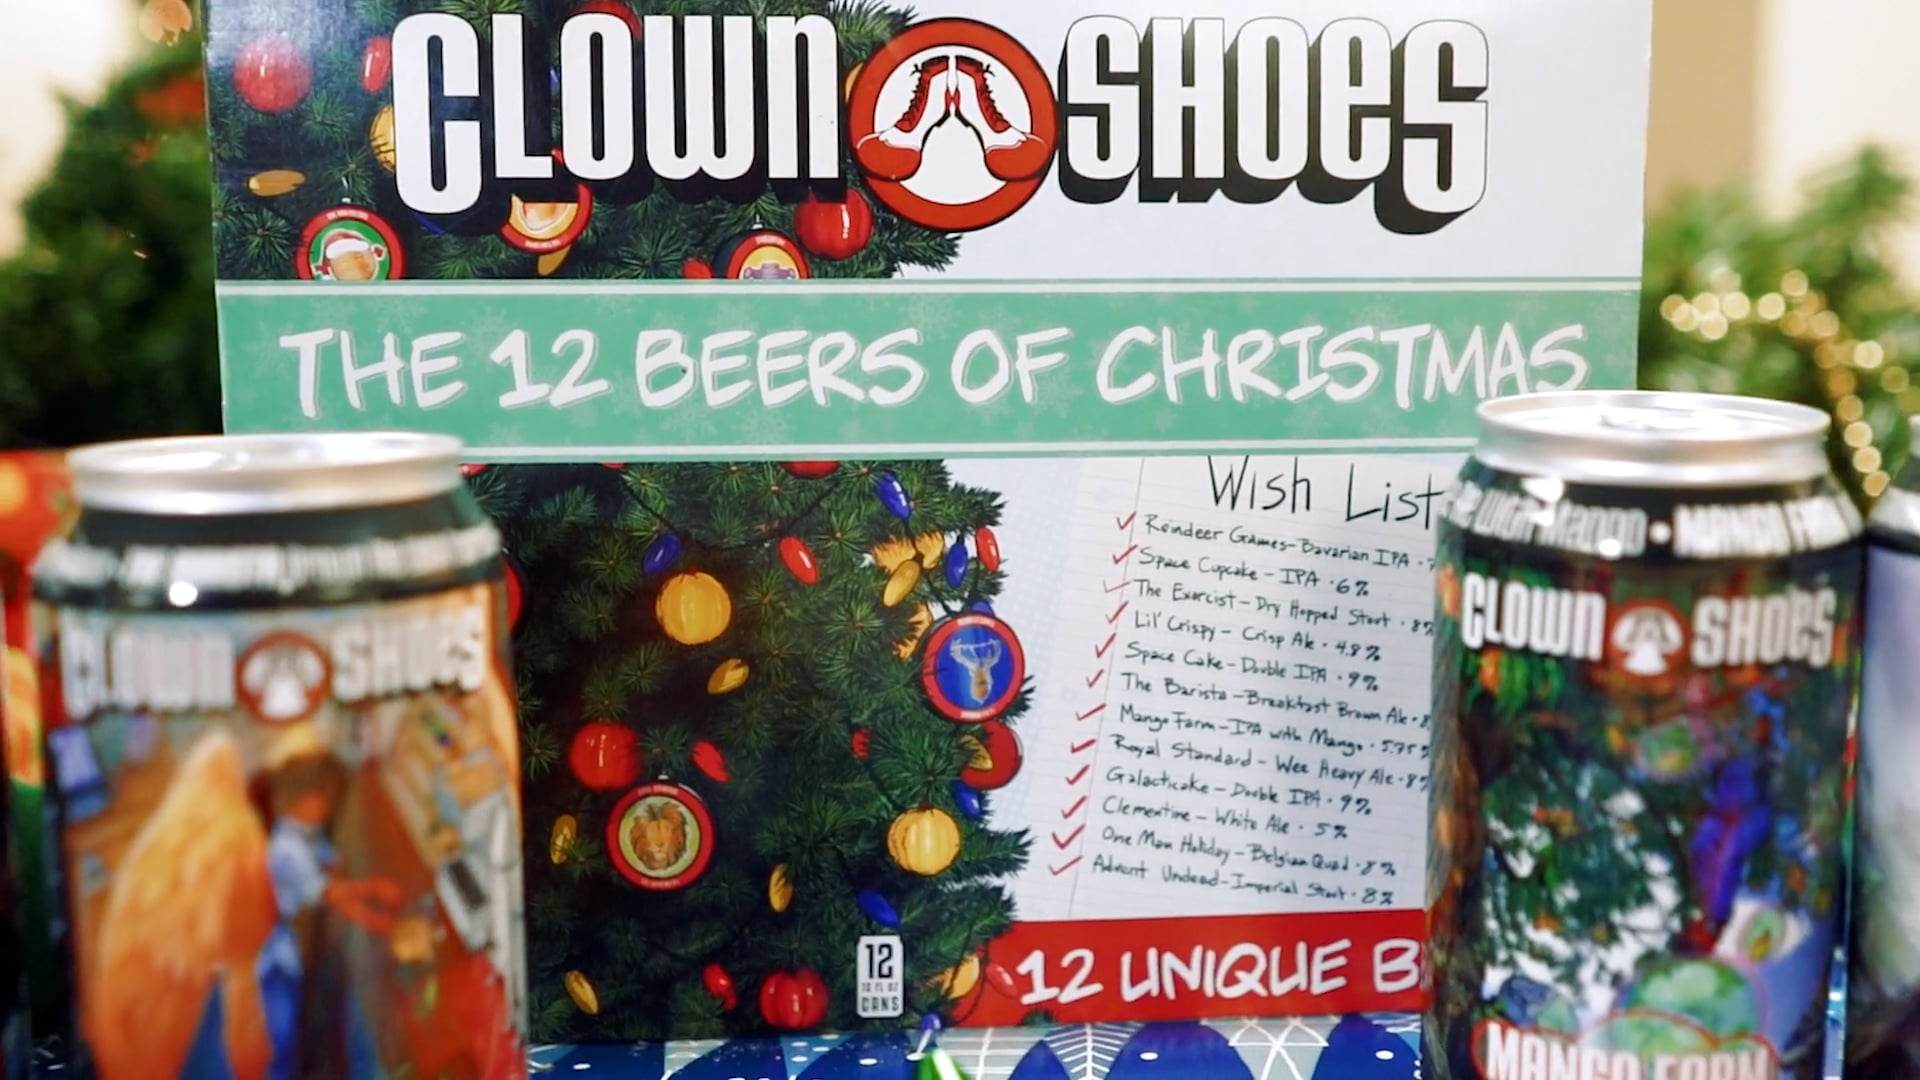 Mass Bay Brewing Portfolio Clown Shoes 12 Beers of Christmas on Vimeo